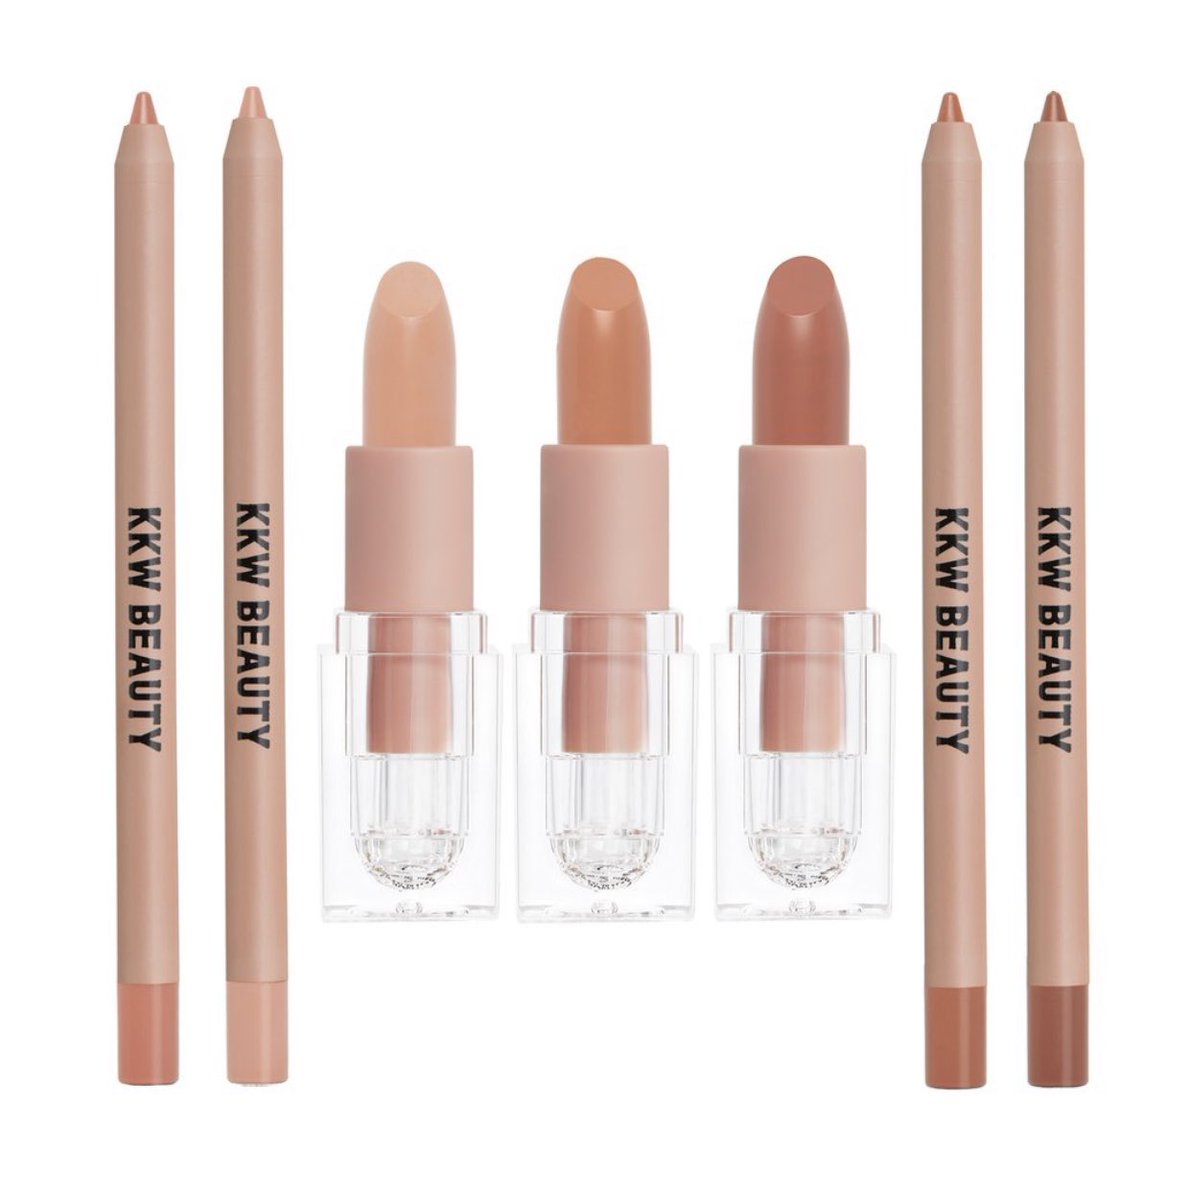 The Complete Nude Lipstick & Lip Liner Bundle is still available to sho...